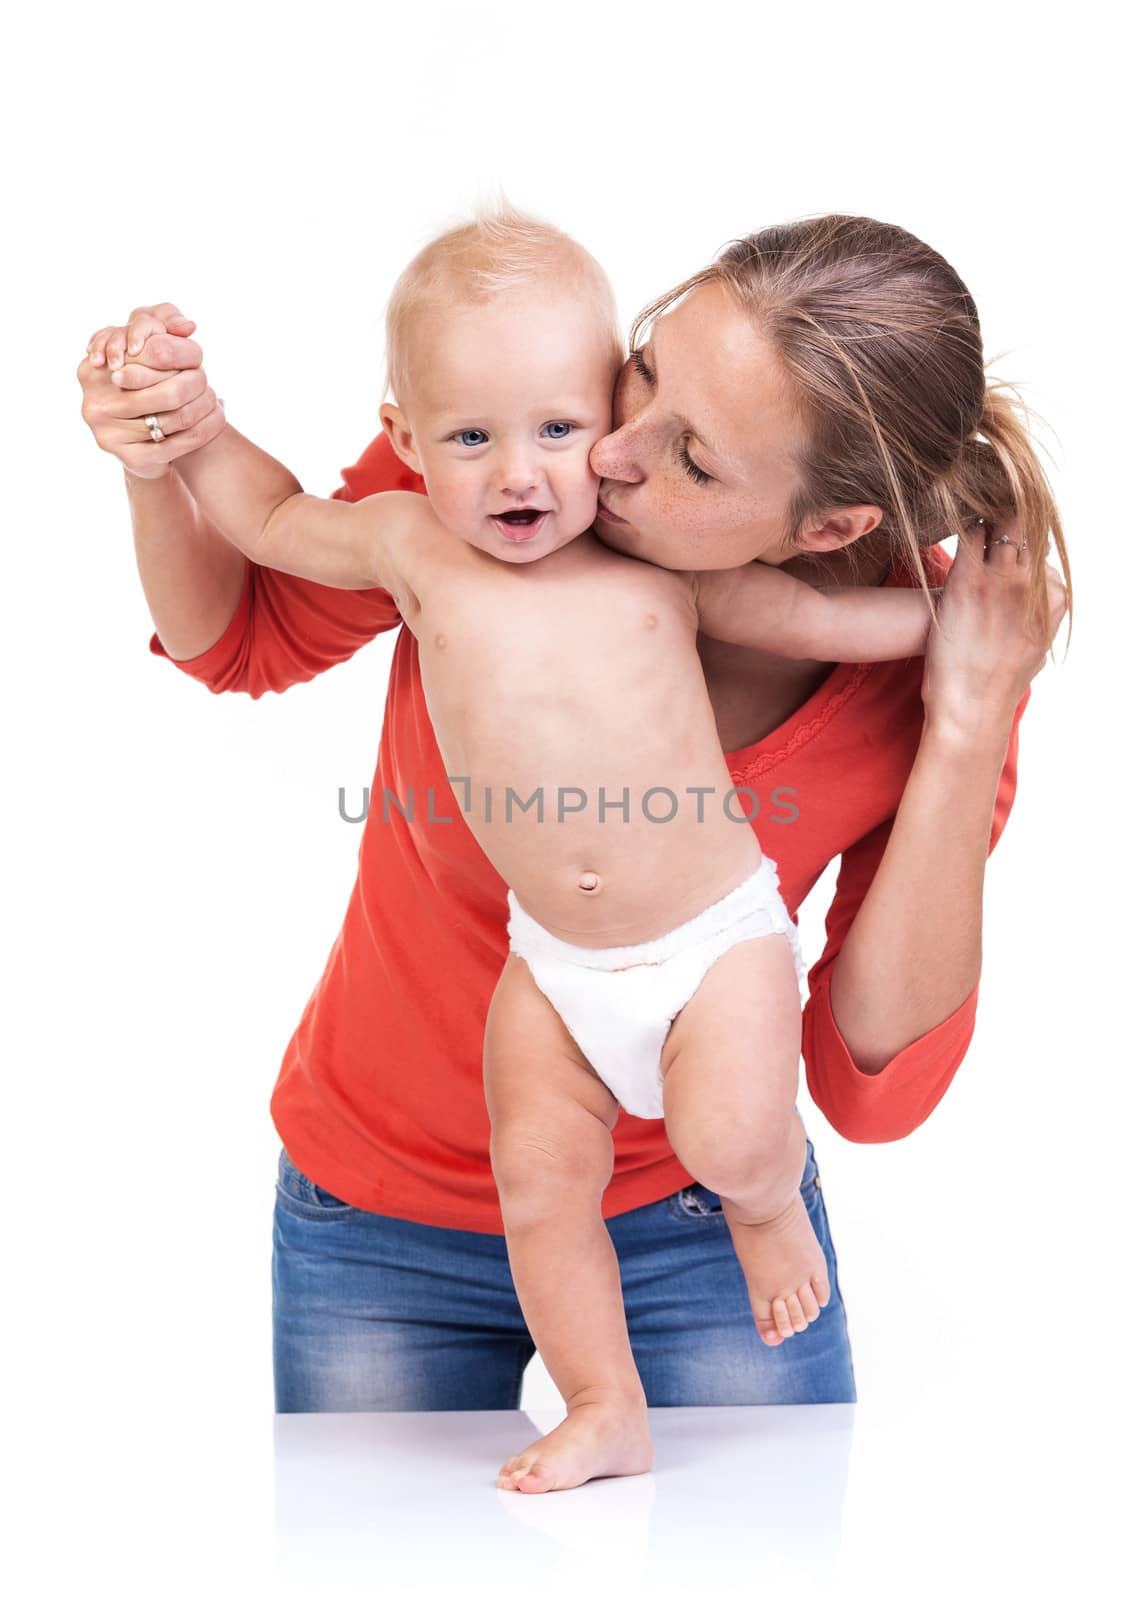 Baby boy learning to walk with mother's help by photobac